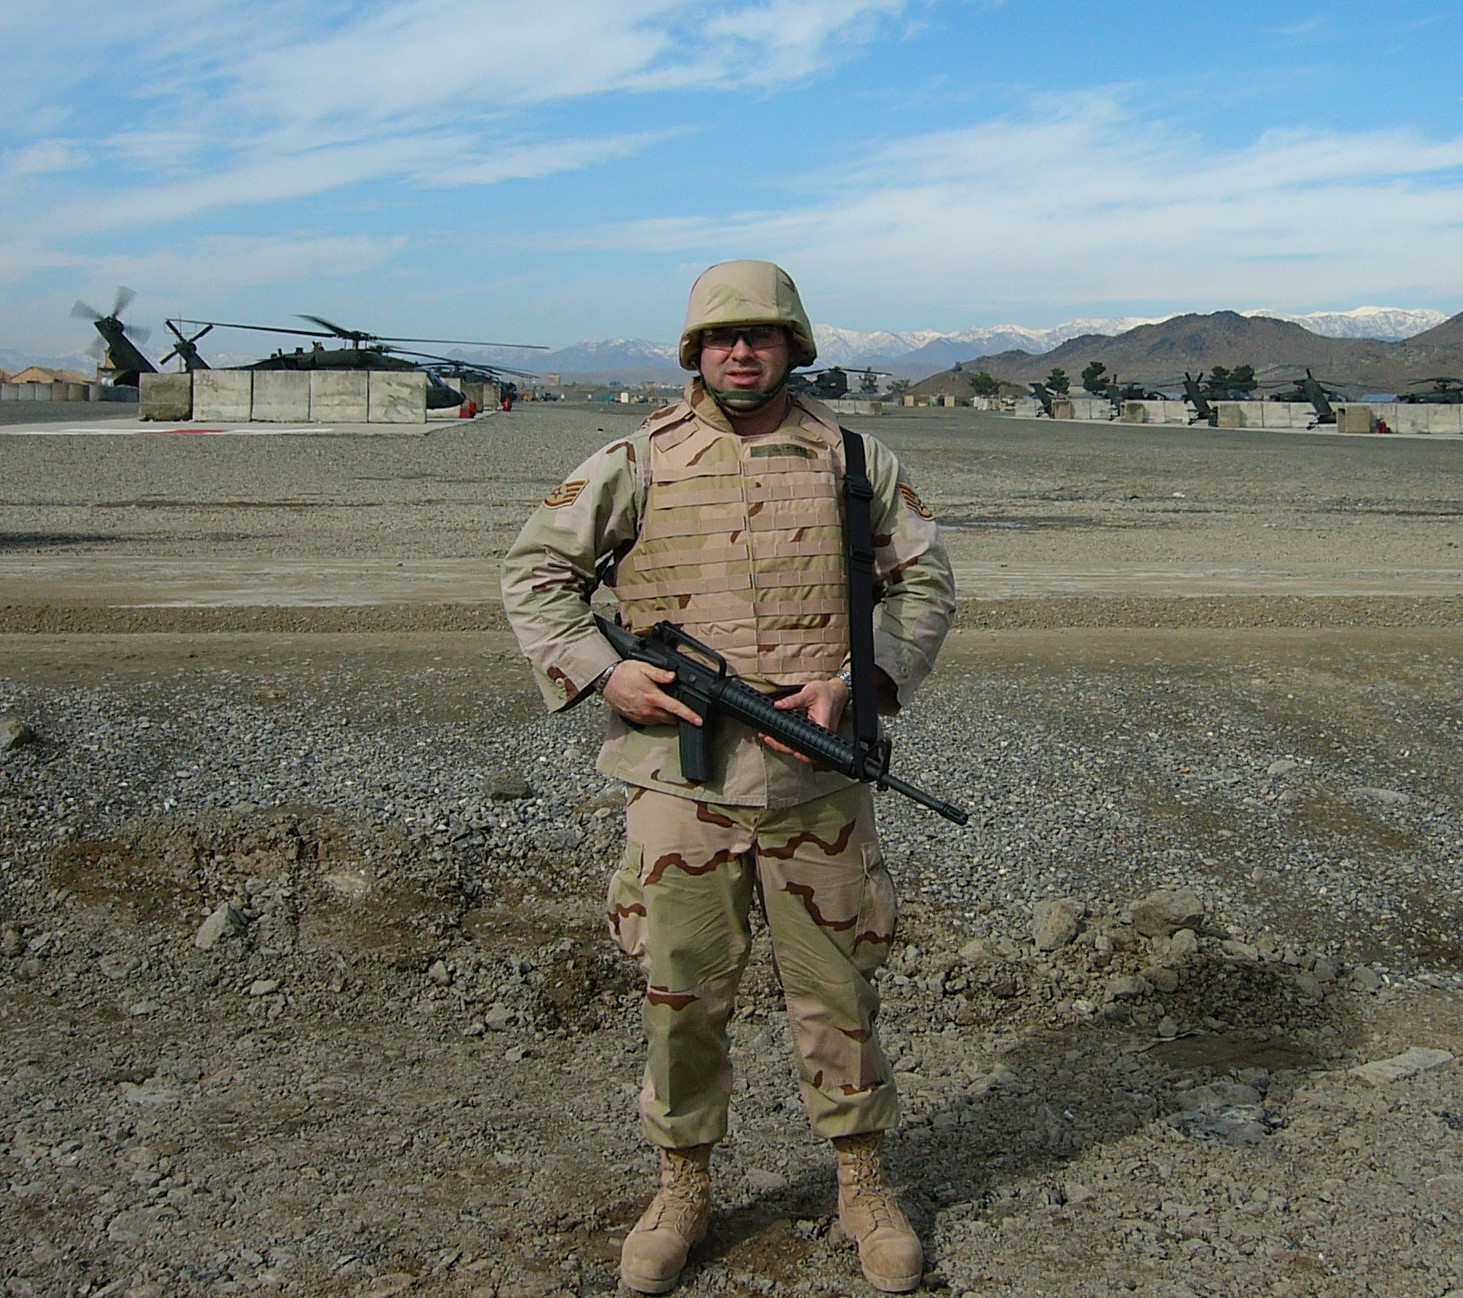 Man in army fatigues poses with rifle and military helicopter and mountains in the background